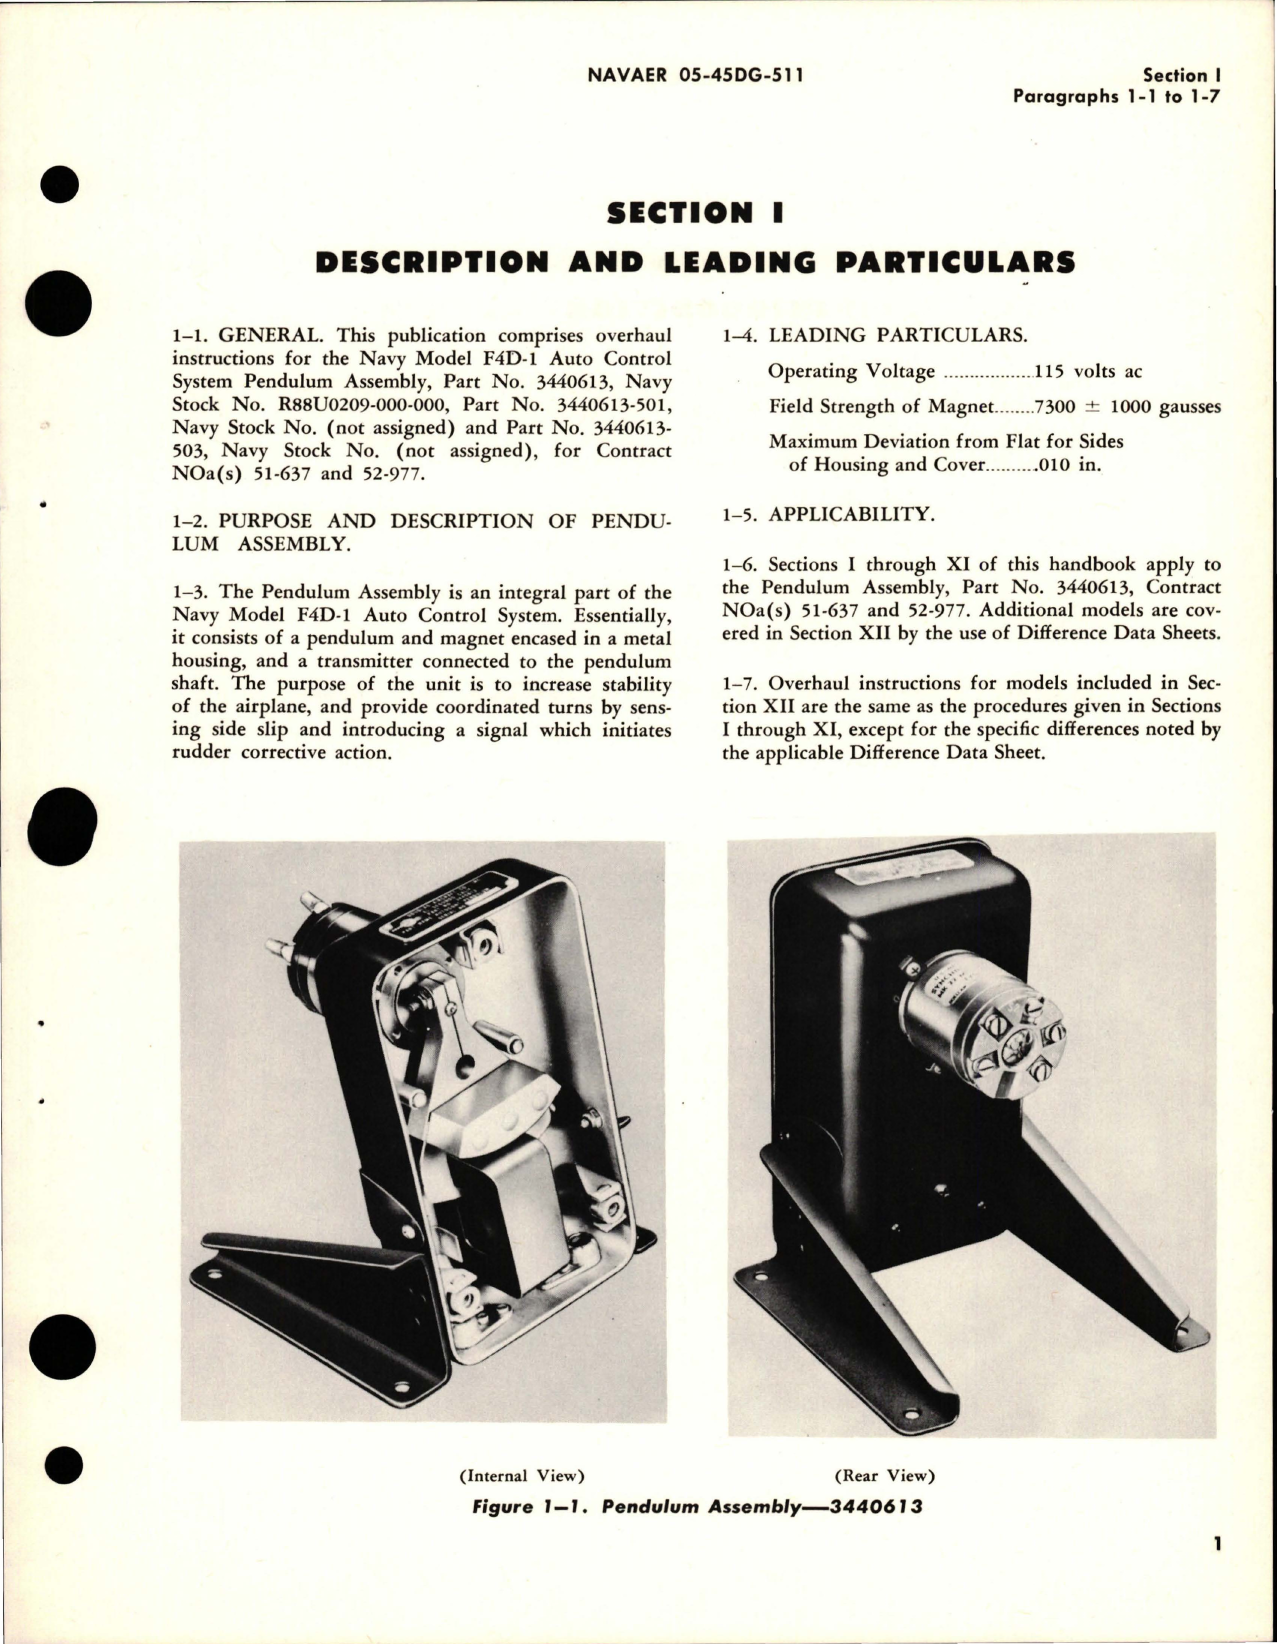 Sample page 5 from AirCorps Library document: Overhaul Instructions for Pendulum Assy - Parts 3440613, 3440613-501, and 3440613-503 for D-1 Auto Control